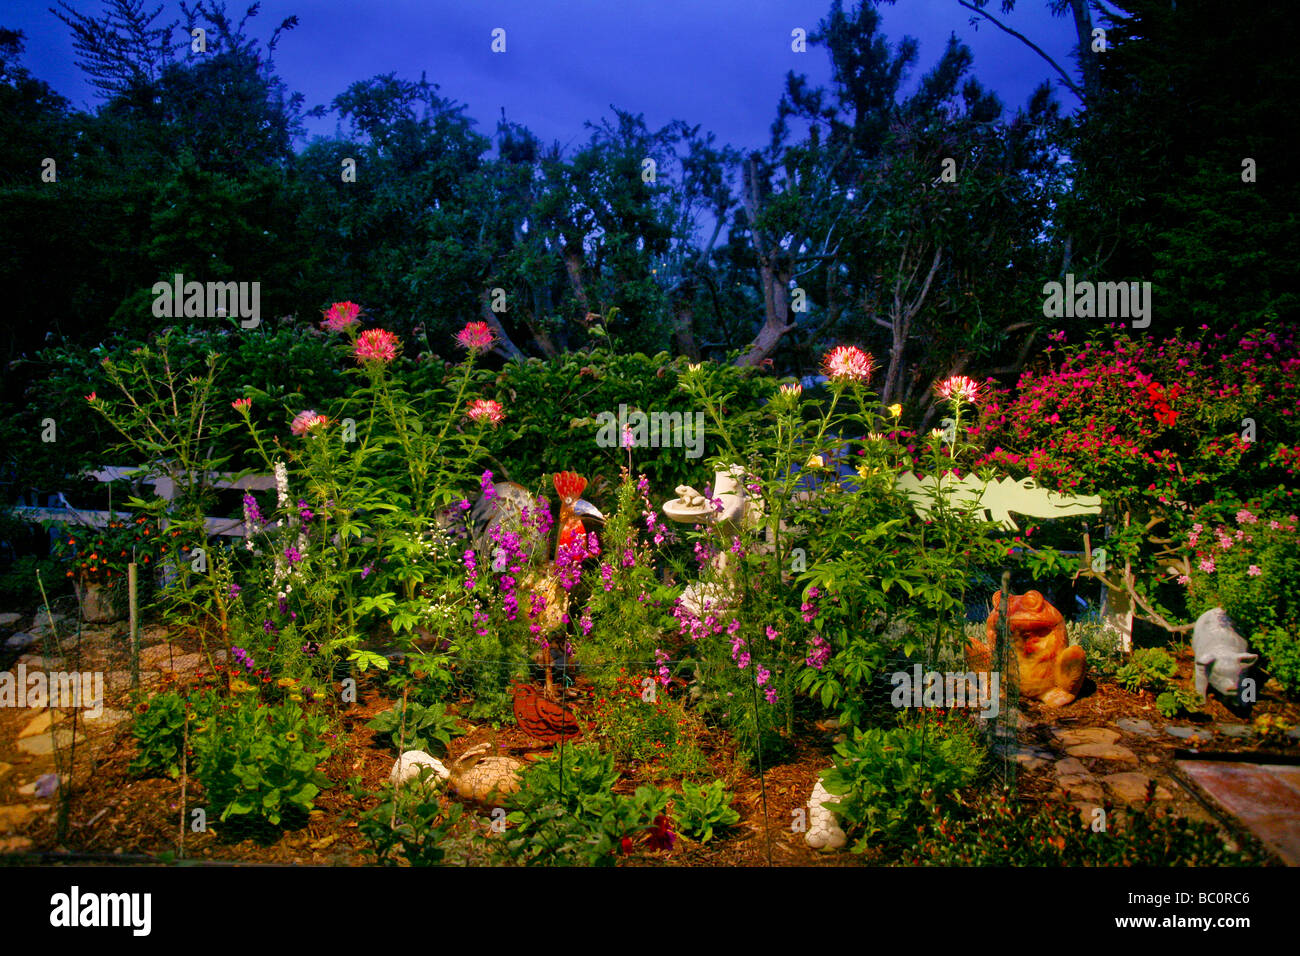 Amusing figures of a rooster, winged frog, and hippopotamus decorate a Southern California garden at twilight. Stock Photo